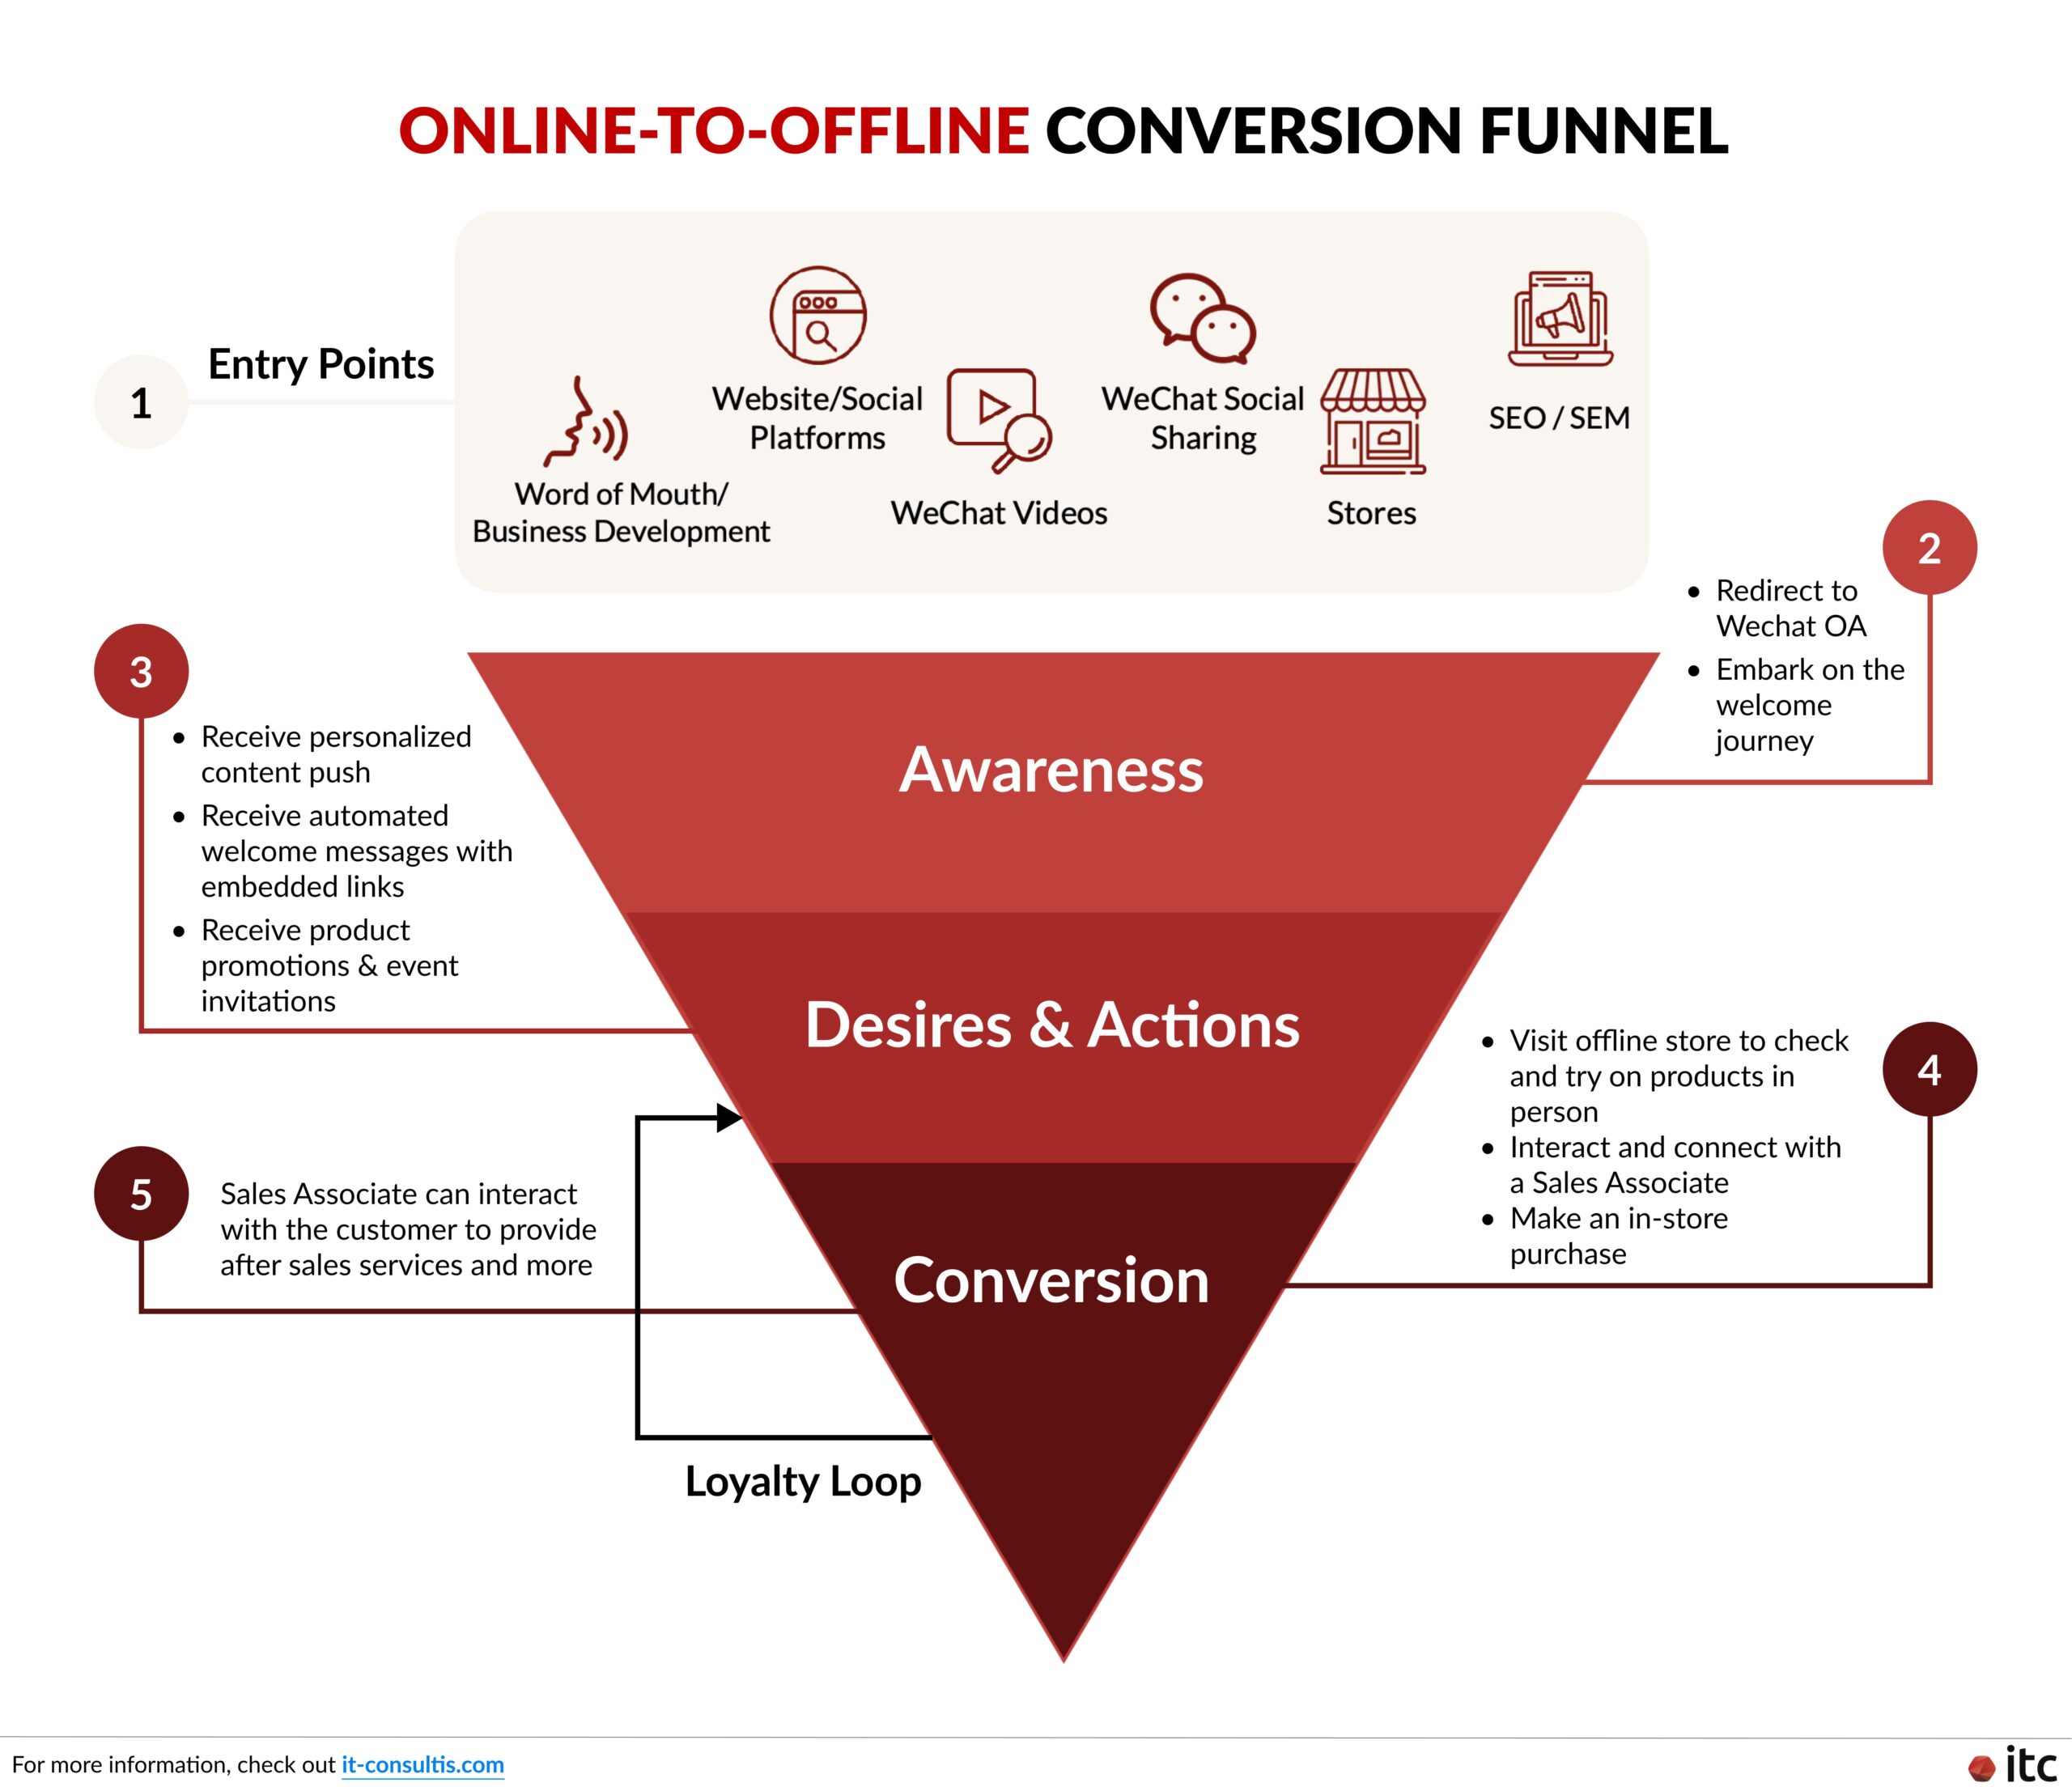 Online-to-offline (O2O) conversion funnel of Moschino using social CRM tools for WeChat